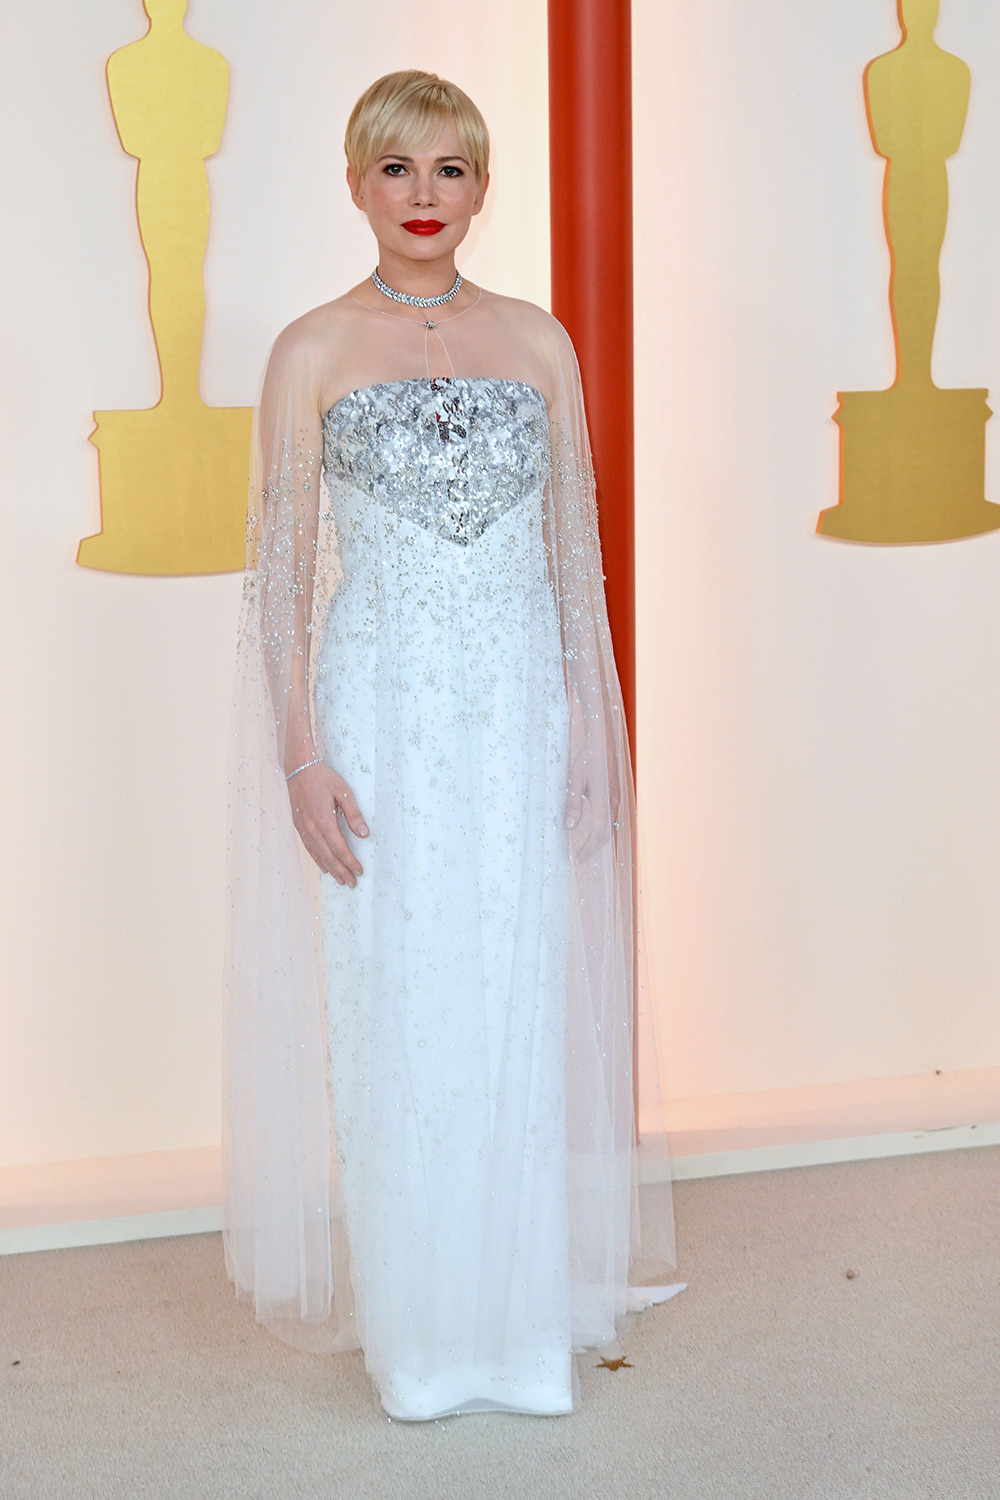 Michelle Willaism on the Oscars 2023 95th Academy Awards red carpet in Los Angeles